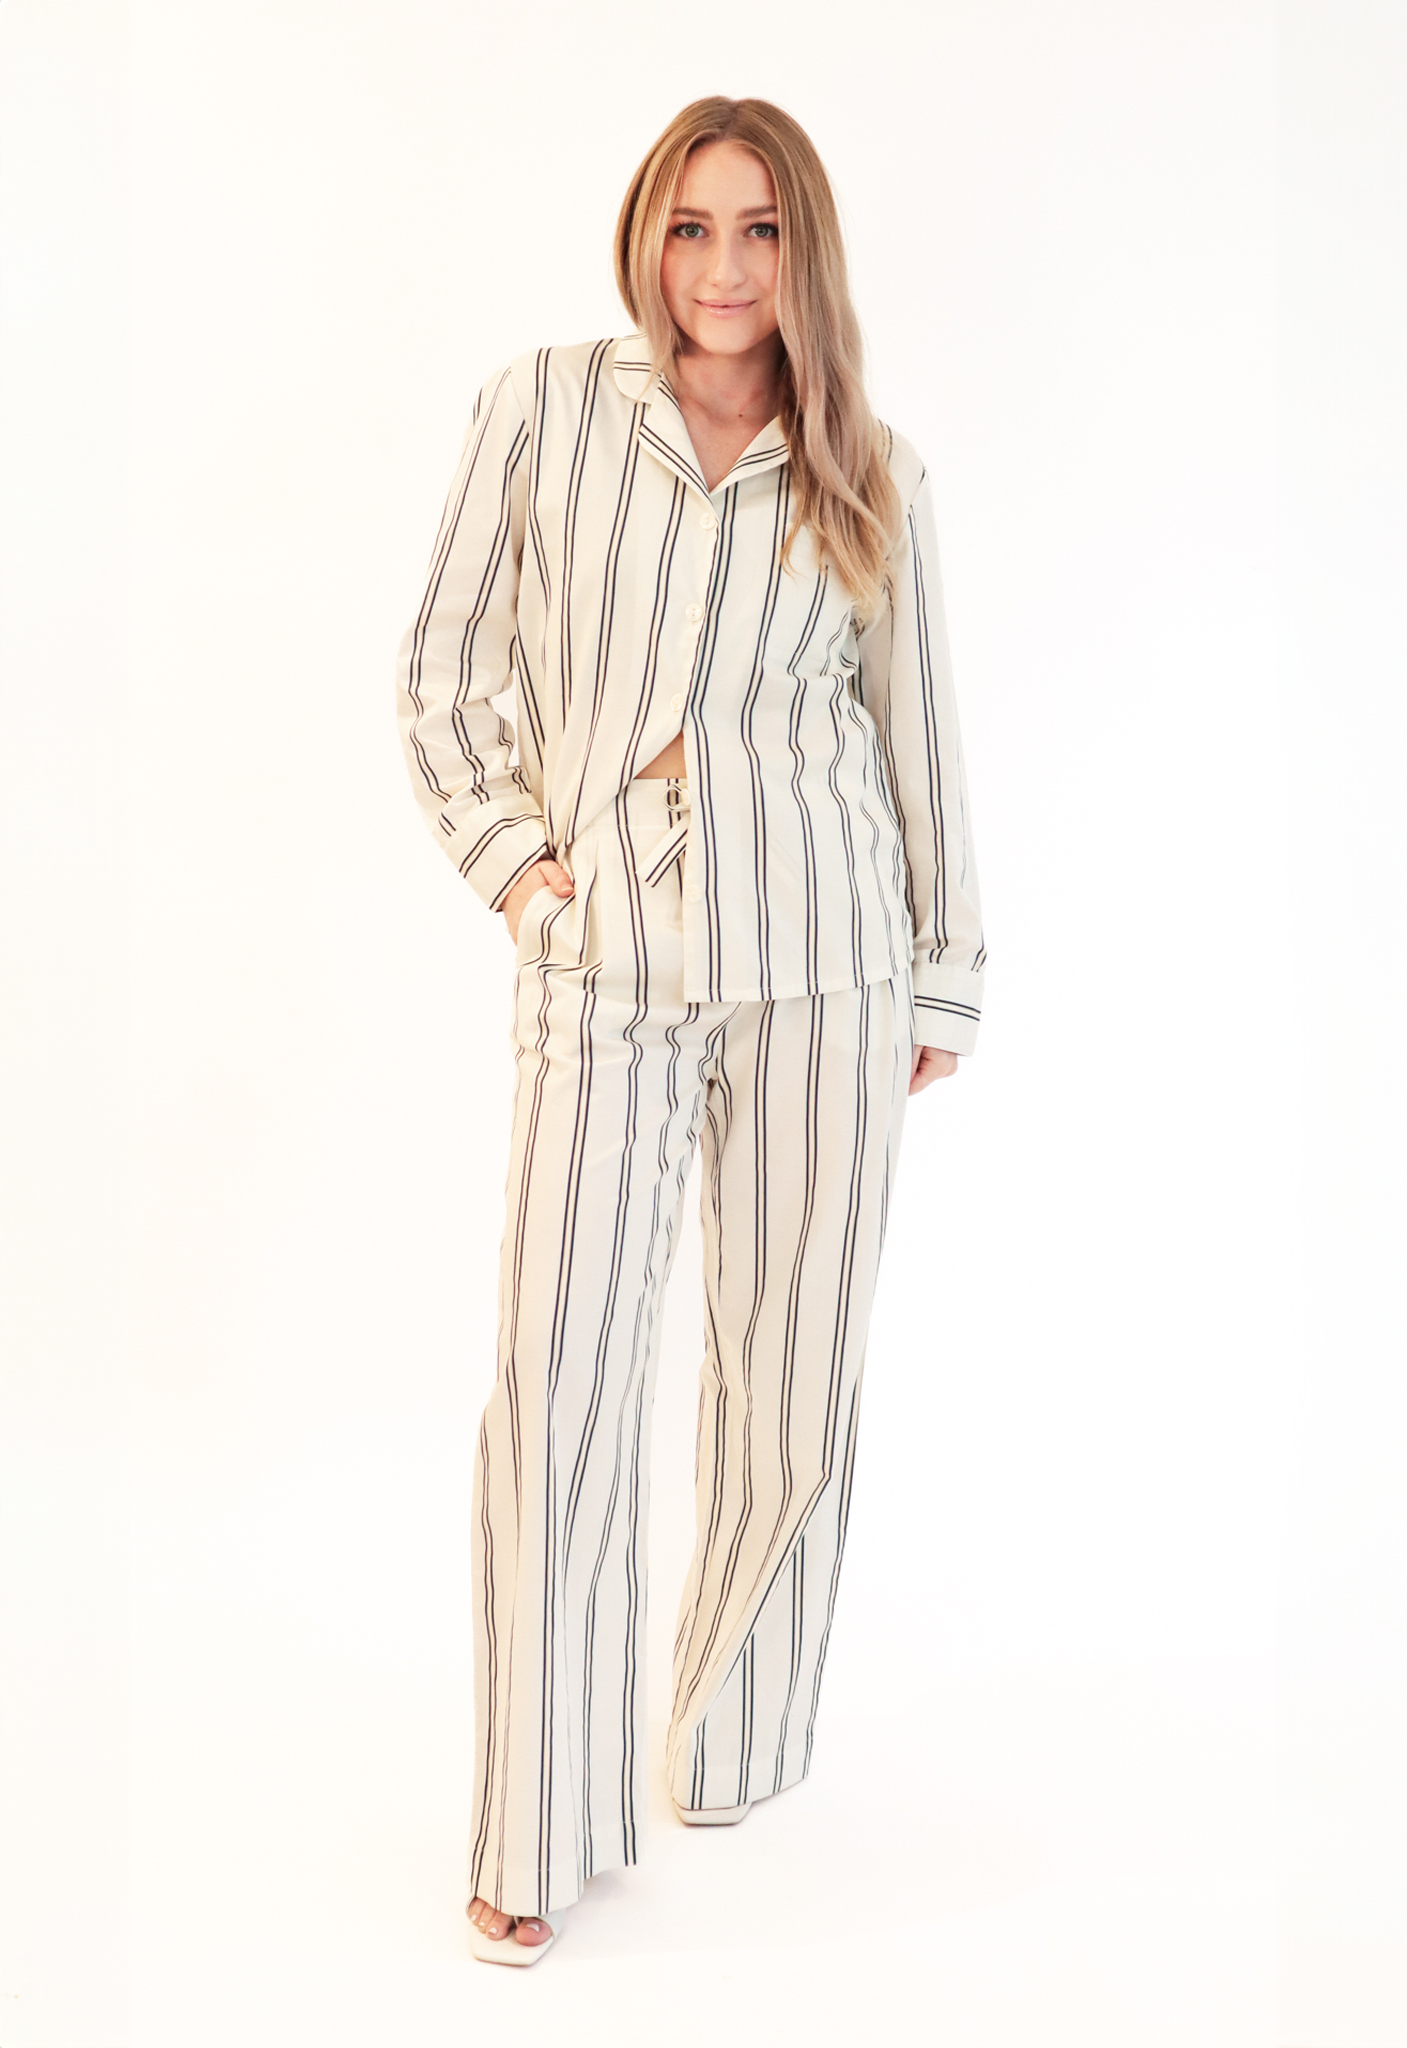 Saint Liberté brand long white double pinstriped pyjamas with mother of pearl buttons